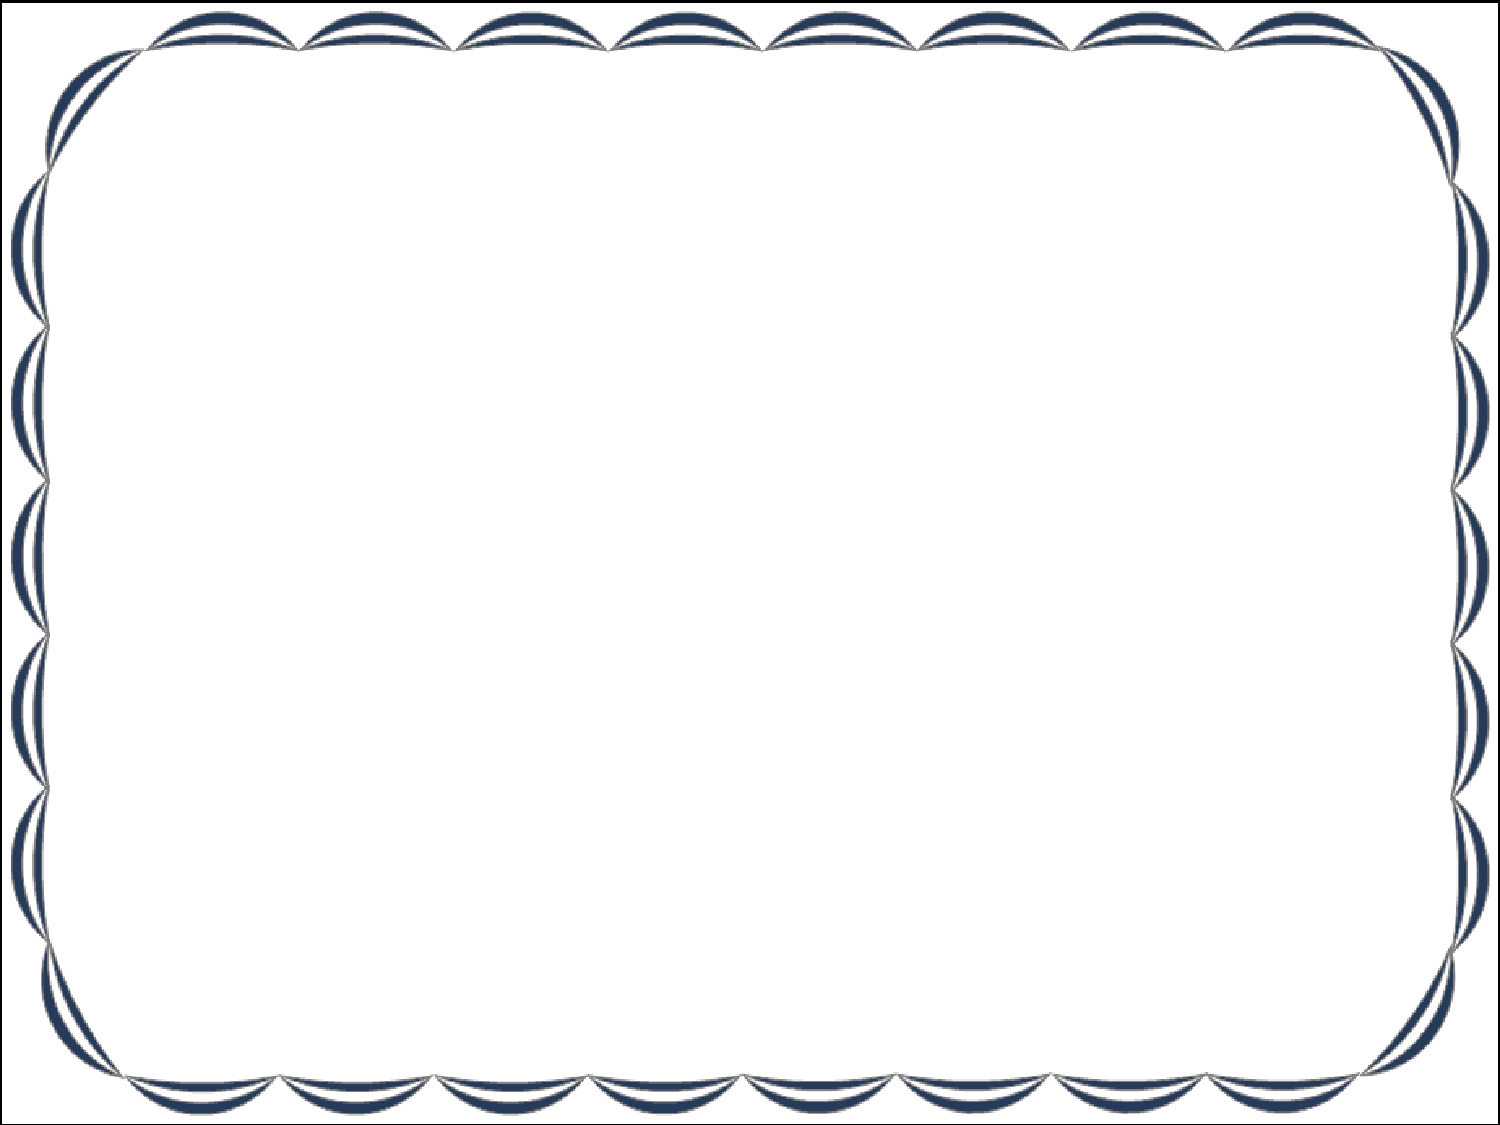 Free Certificate Borders And Frames, Download Free Certificate For Free Printable Certificate Border Templates